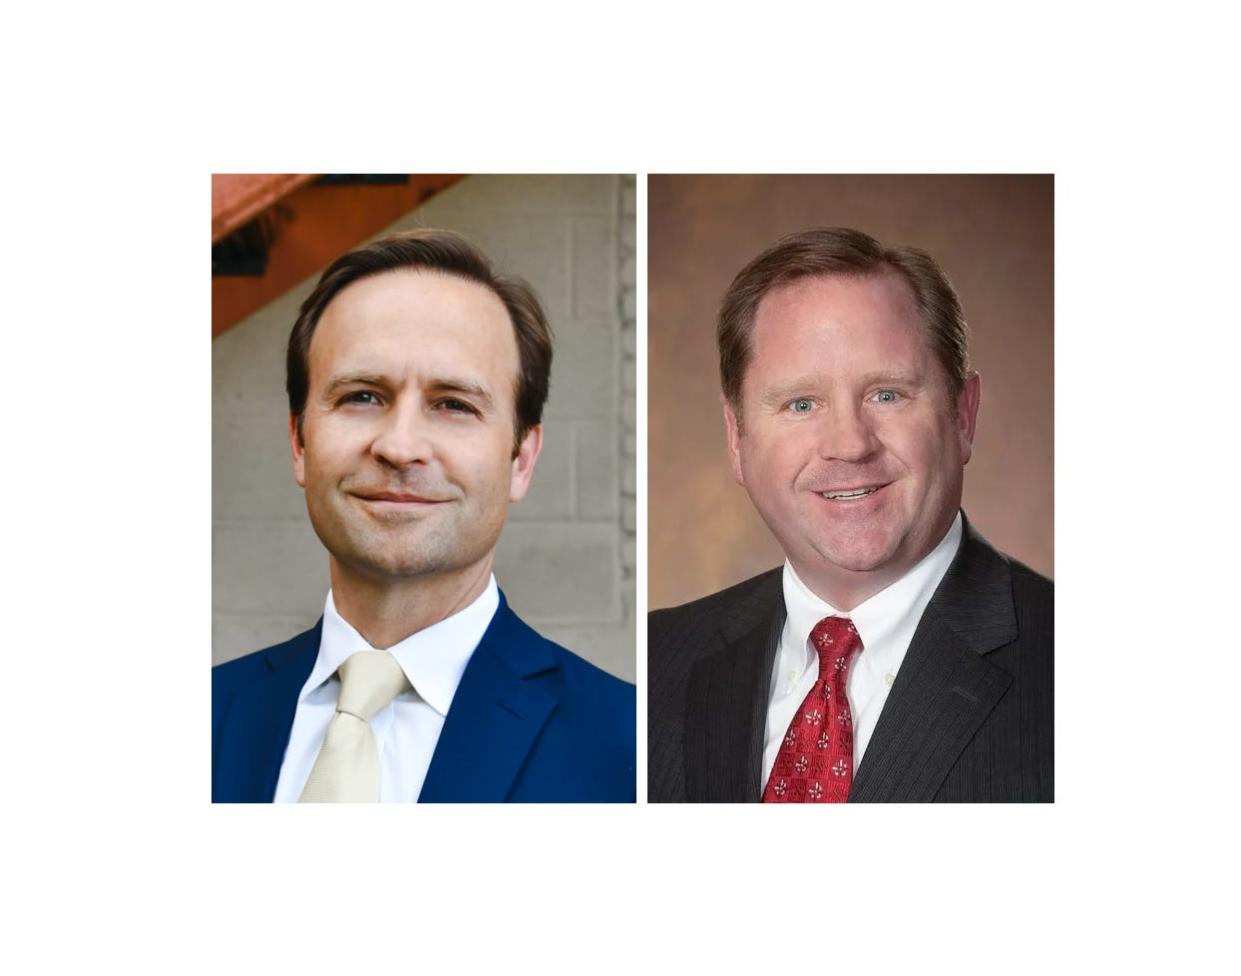 Brian Calley (left) and Paul Long (right)